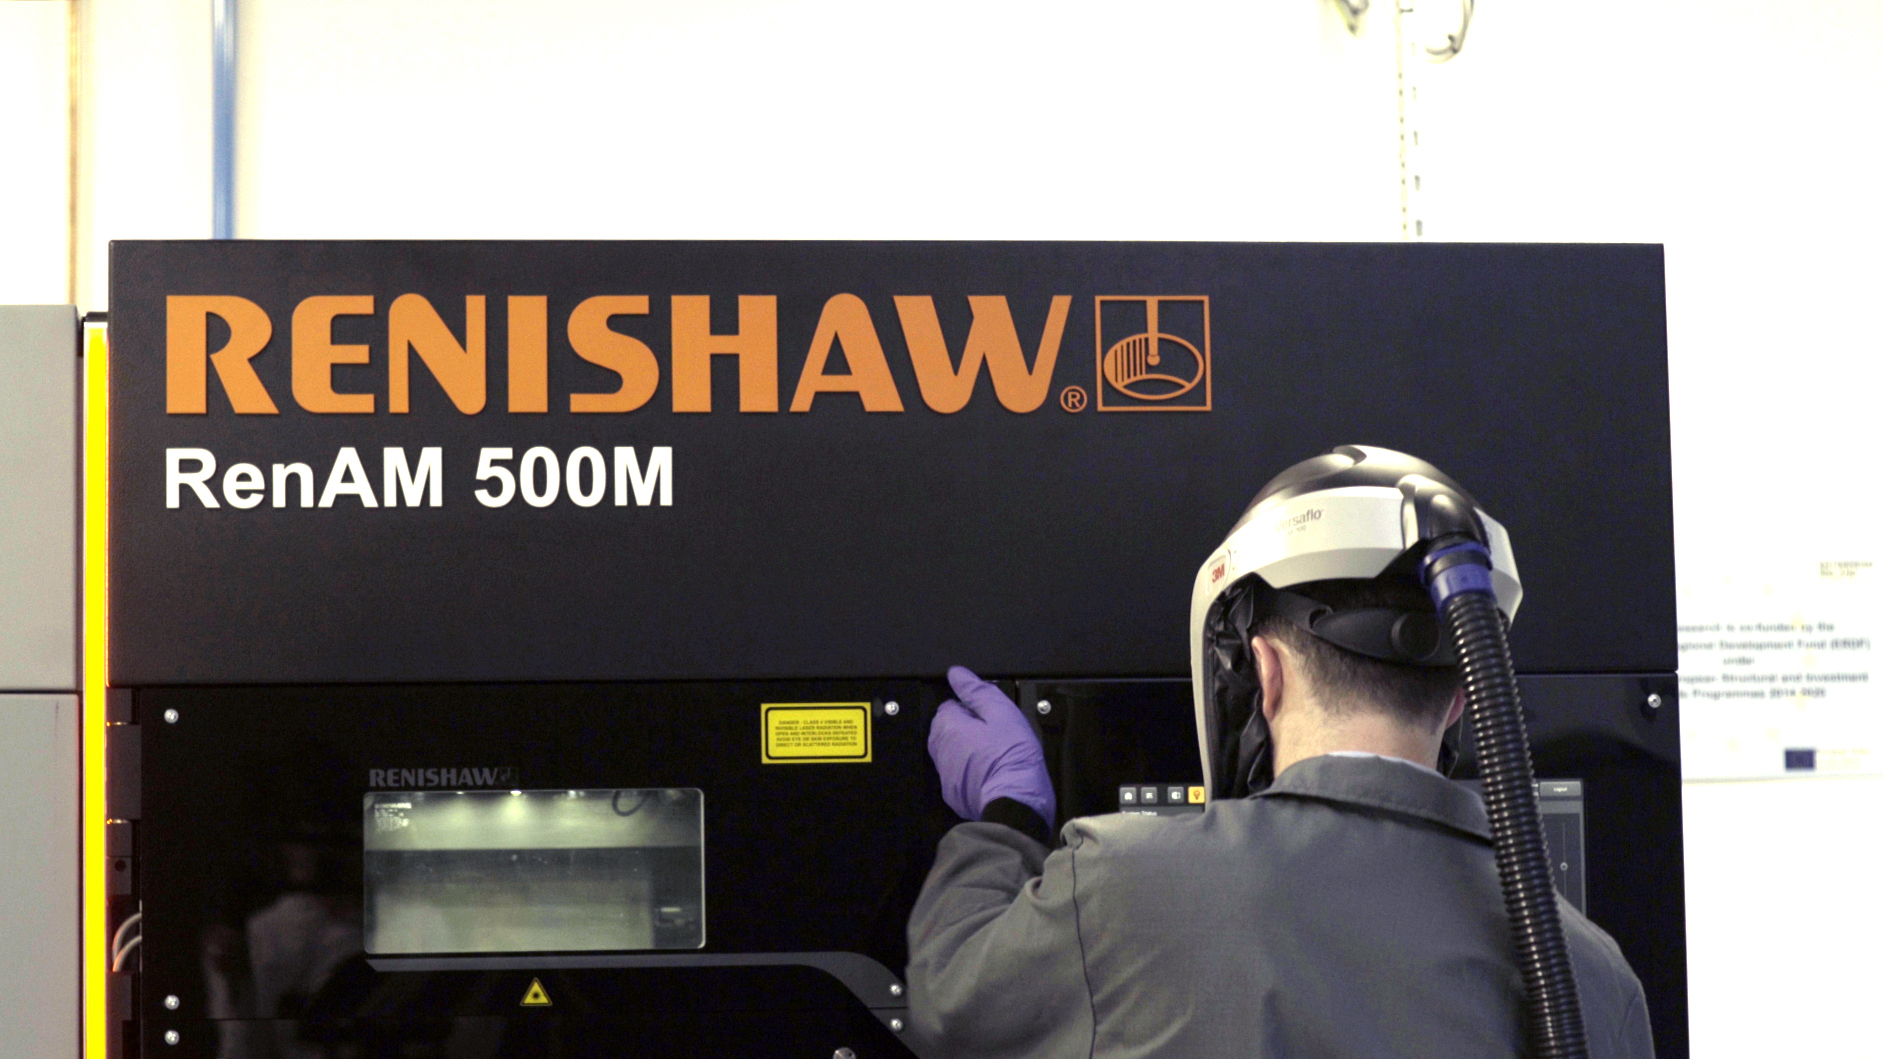 Renishaw AM systems were used to realise the physical part